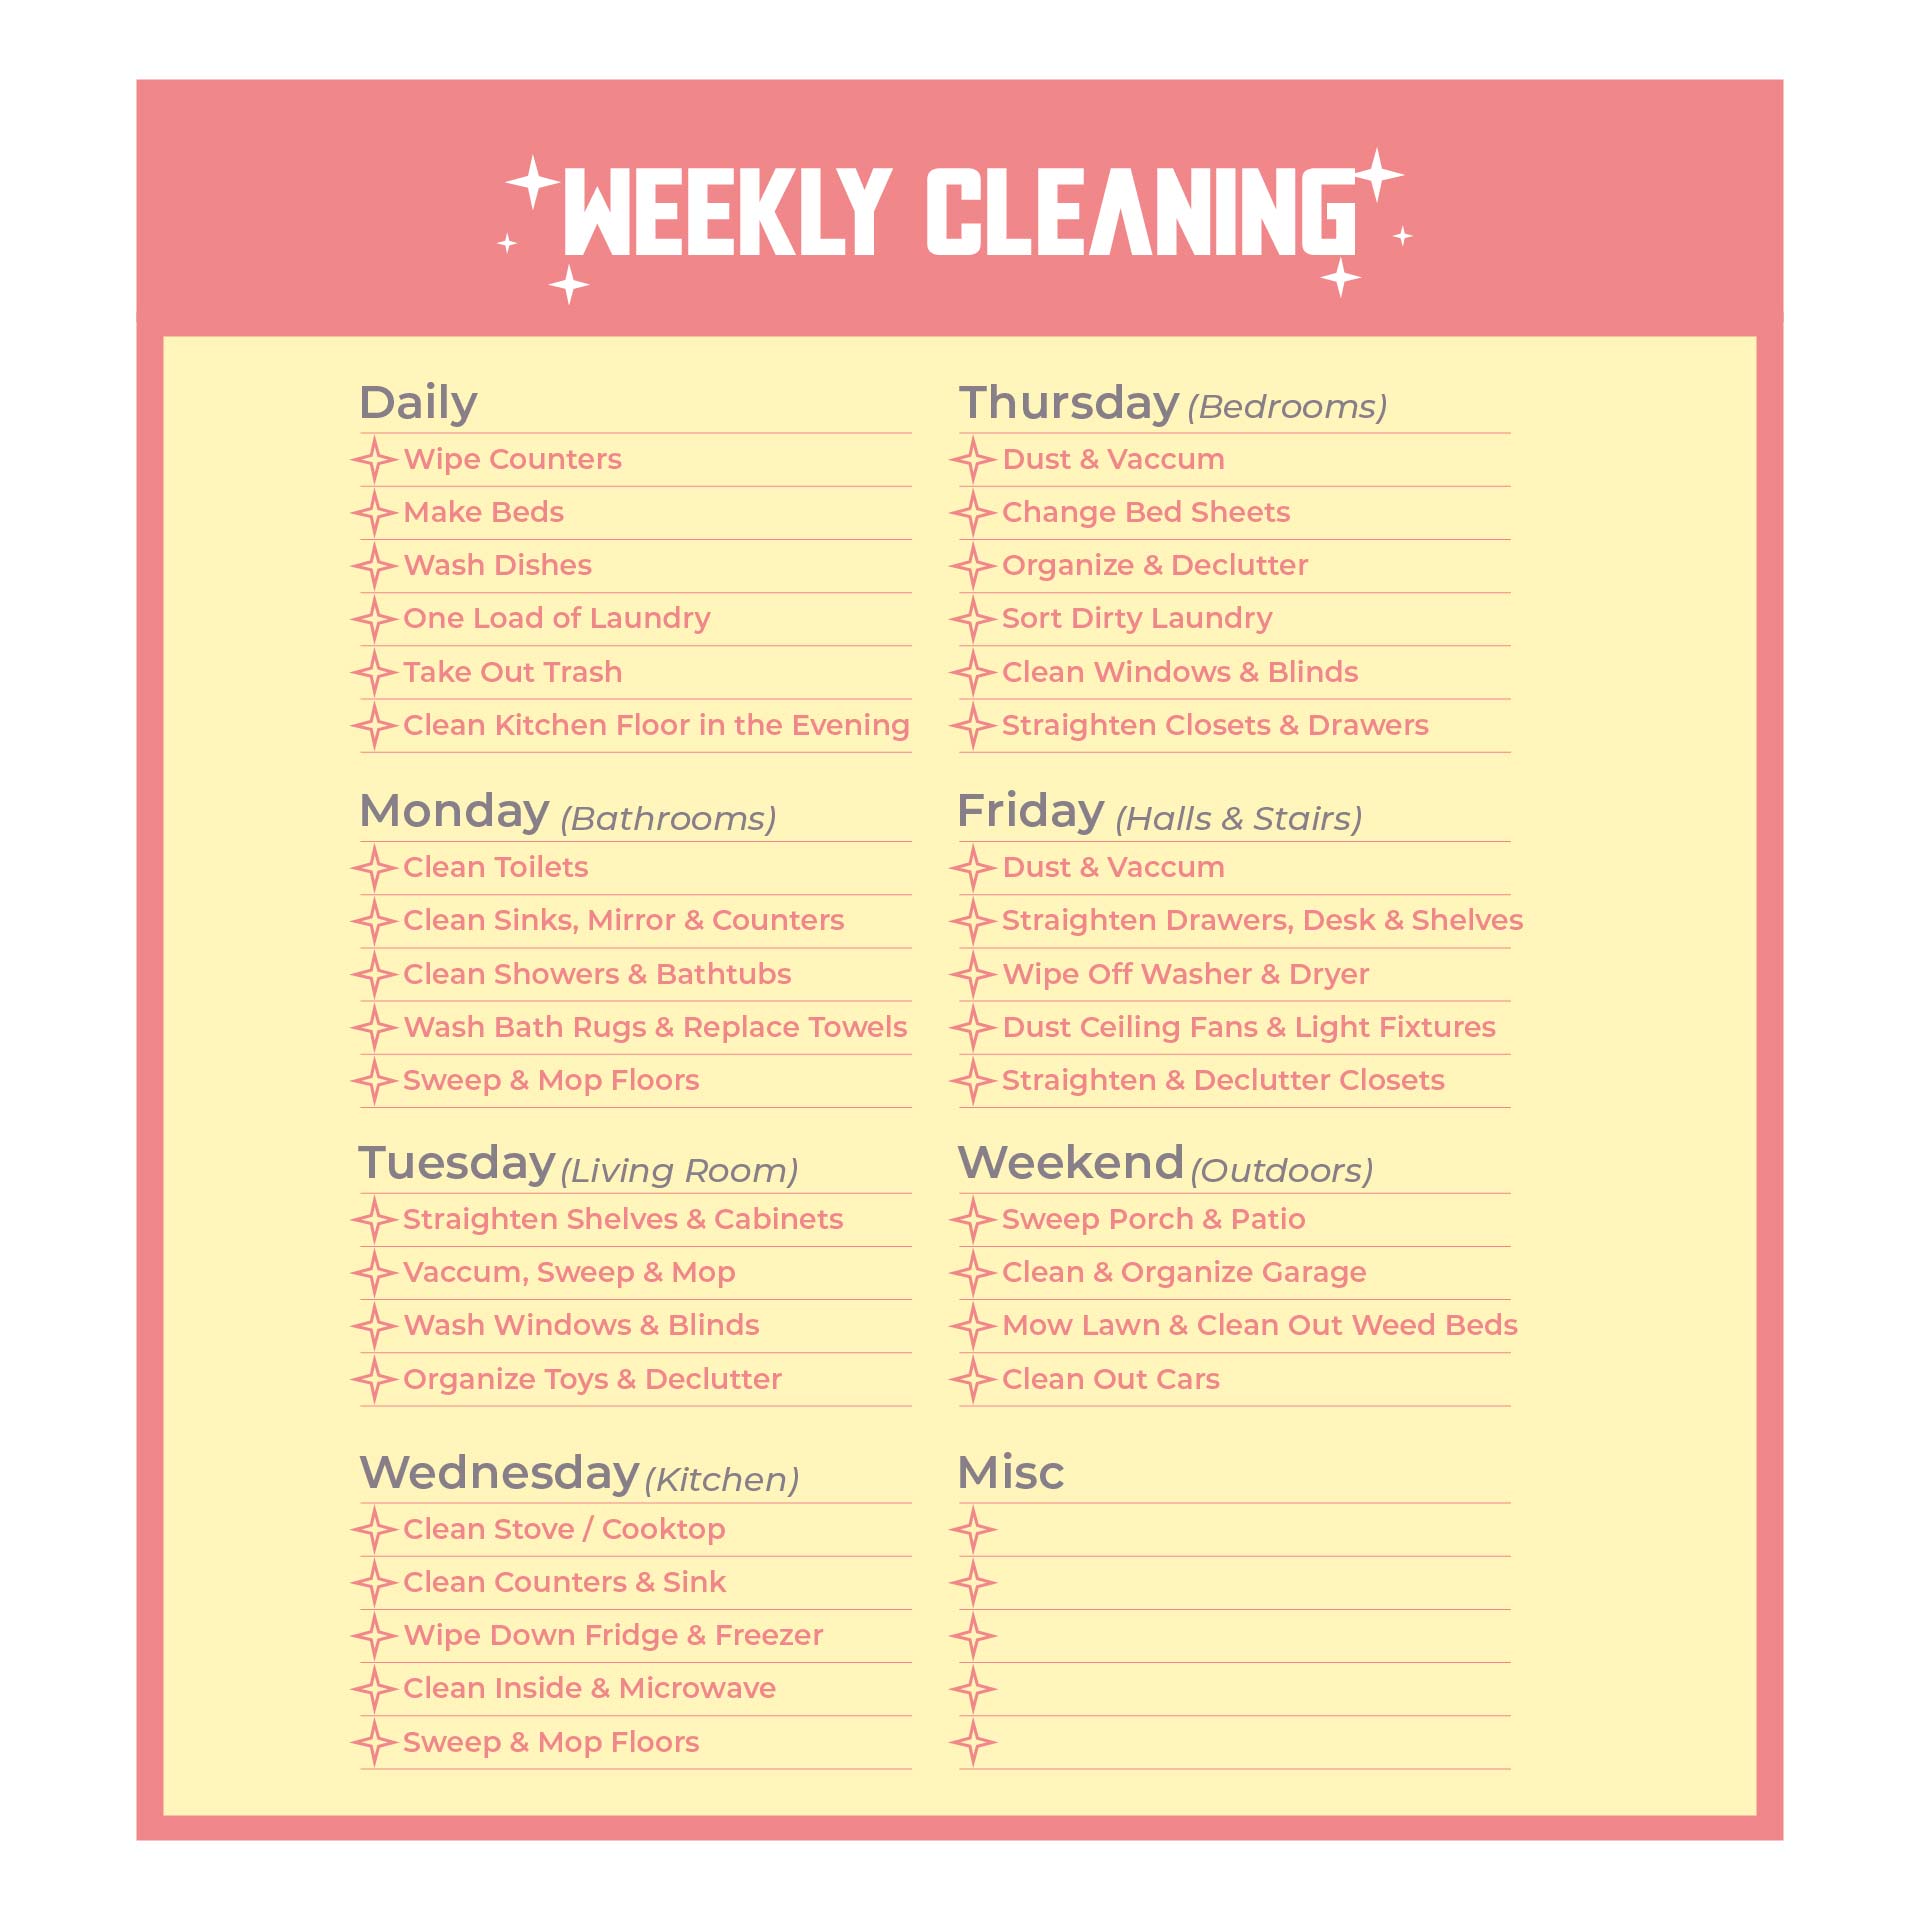 8-best-images-of-printable-monthly-cleaning-checklist-monthly-images